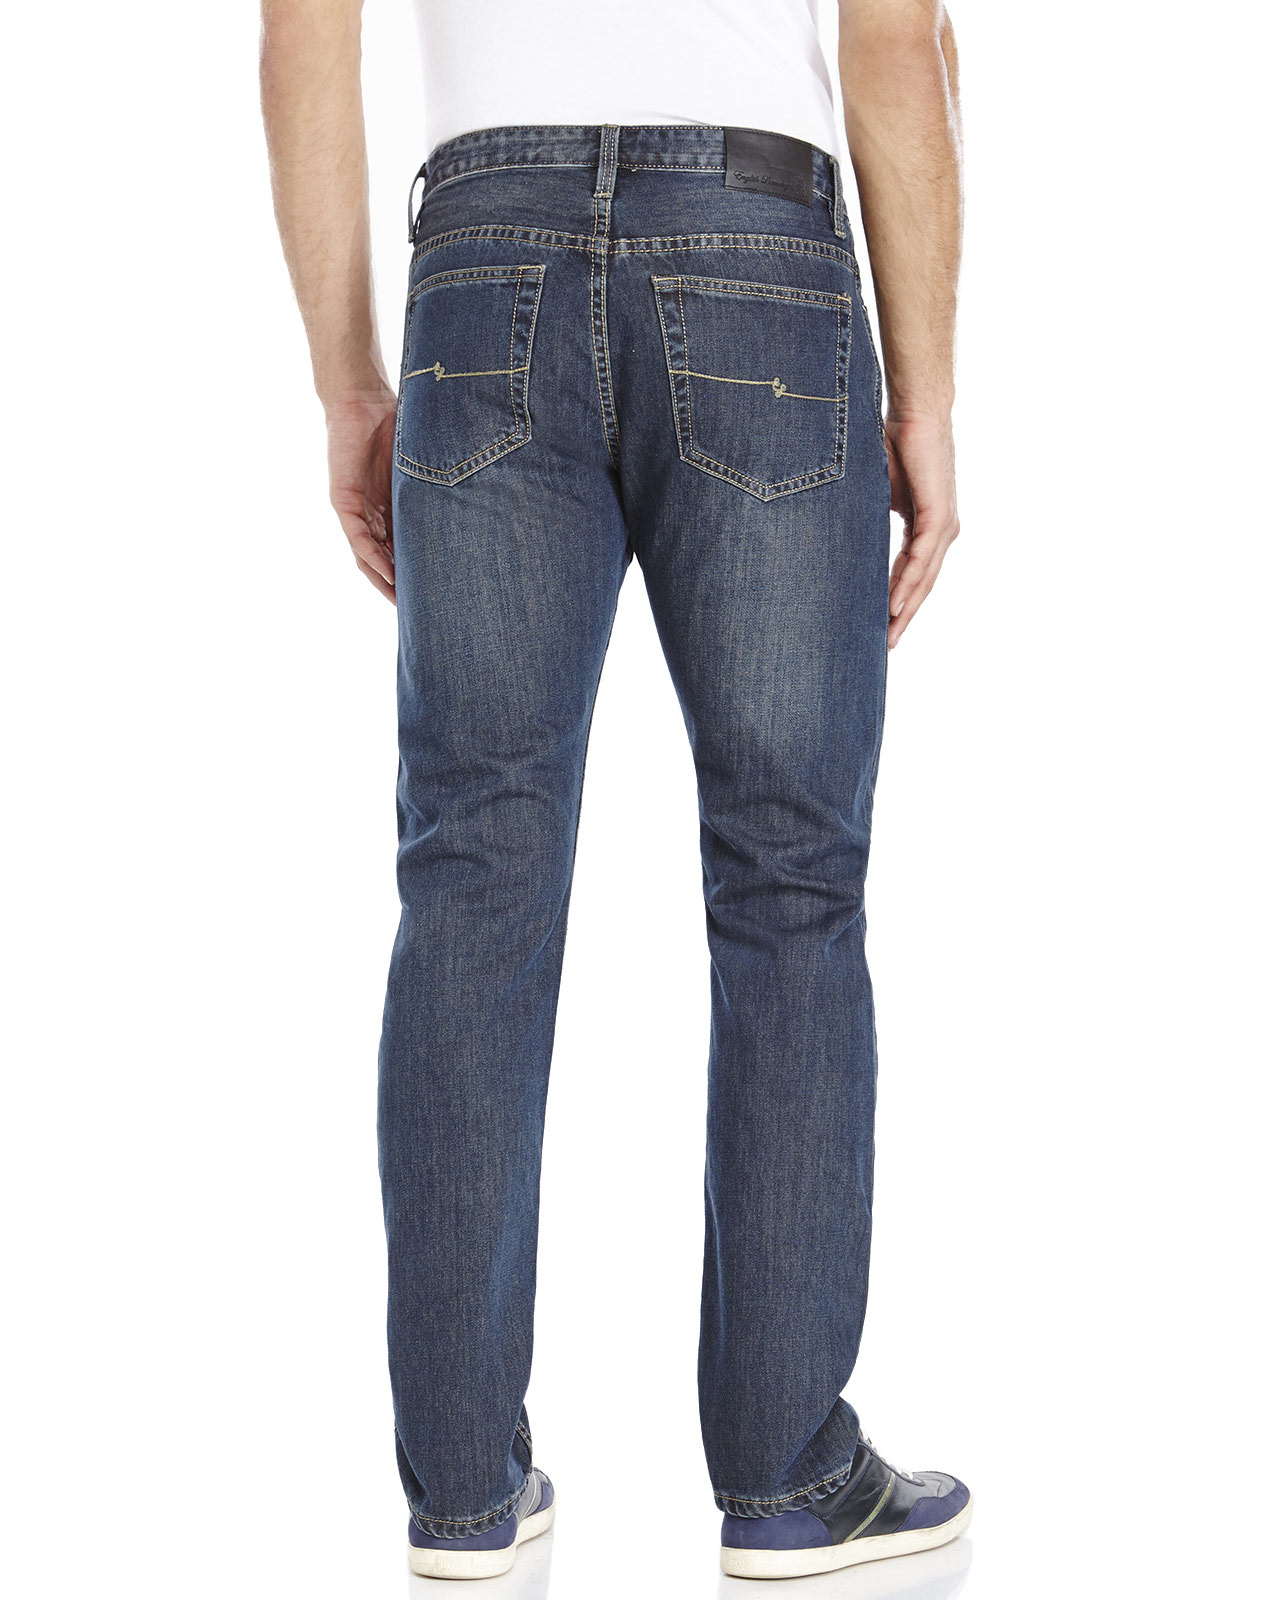 Lyst - English Laundry Dark Wash Carnaby Slim Fit Jeans in Blue for Men